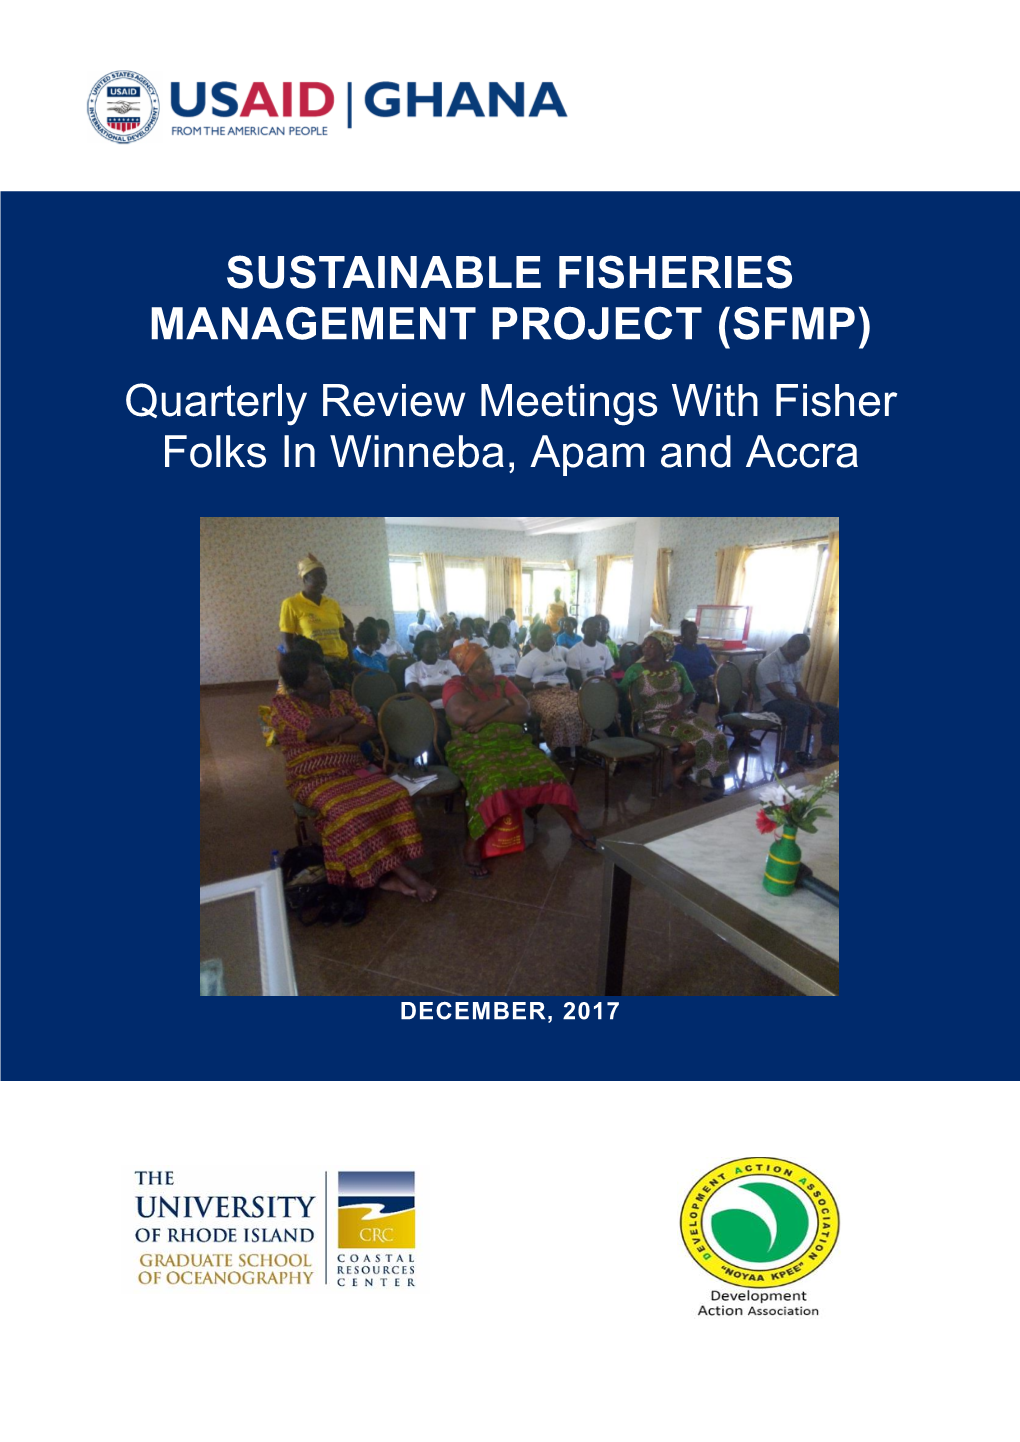 Quarterly Review Meetings with Fisher Folks in Winneba, Apam and Accra